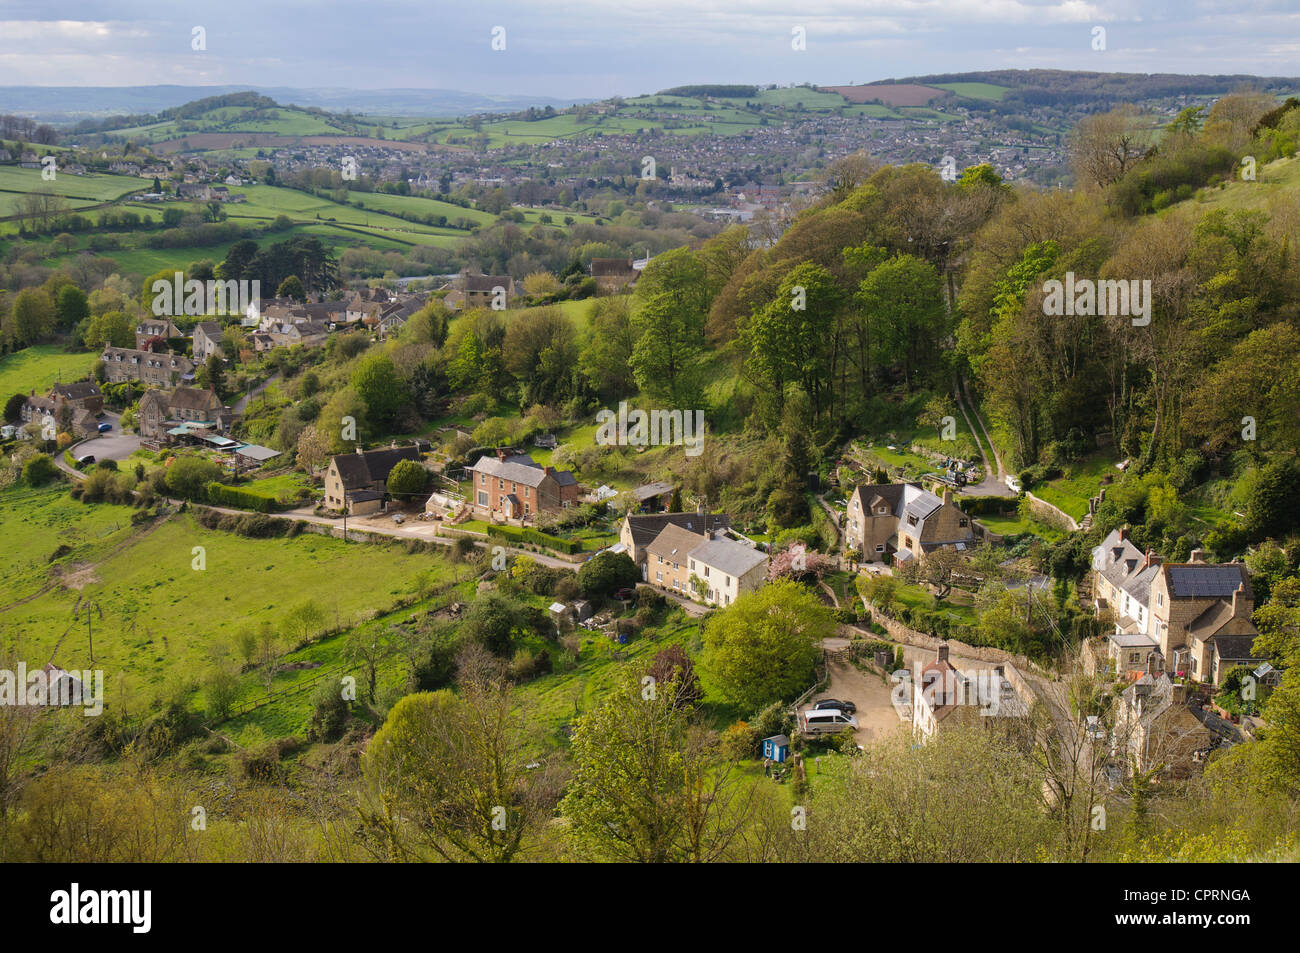 View over Kingscourt from Rodborough Common, Stroud, Gloucestershire, Cotswolds Stock Photo